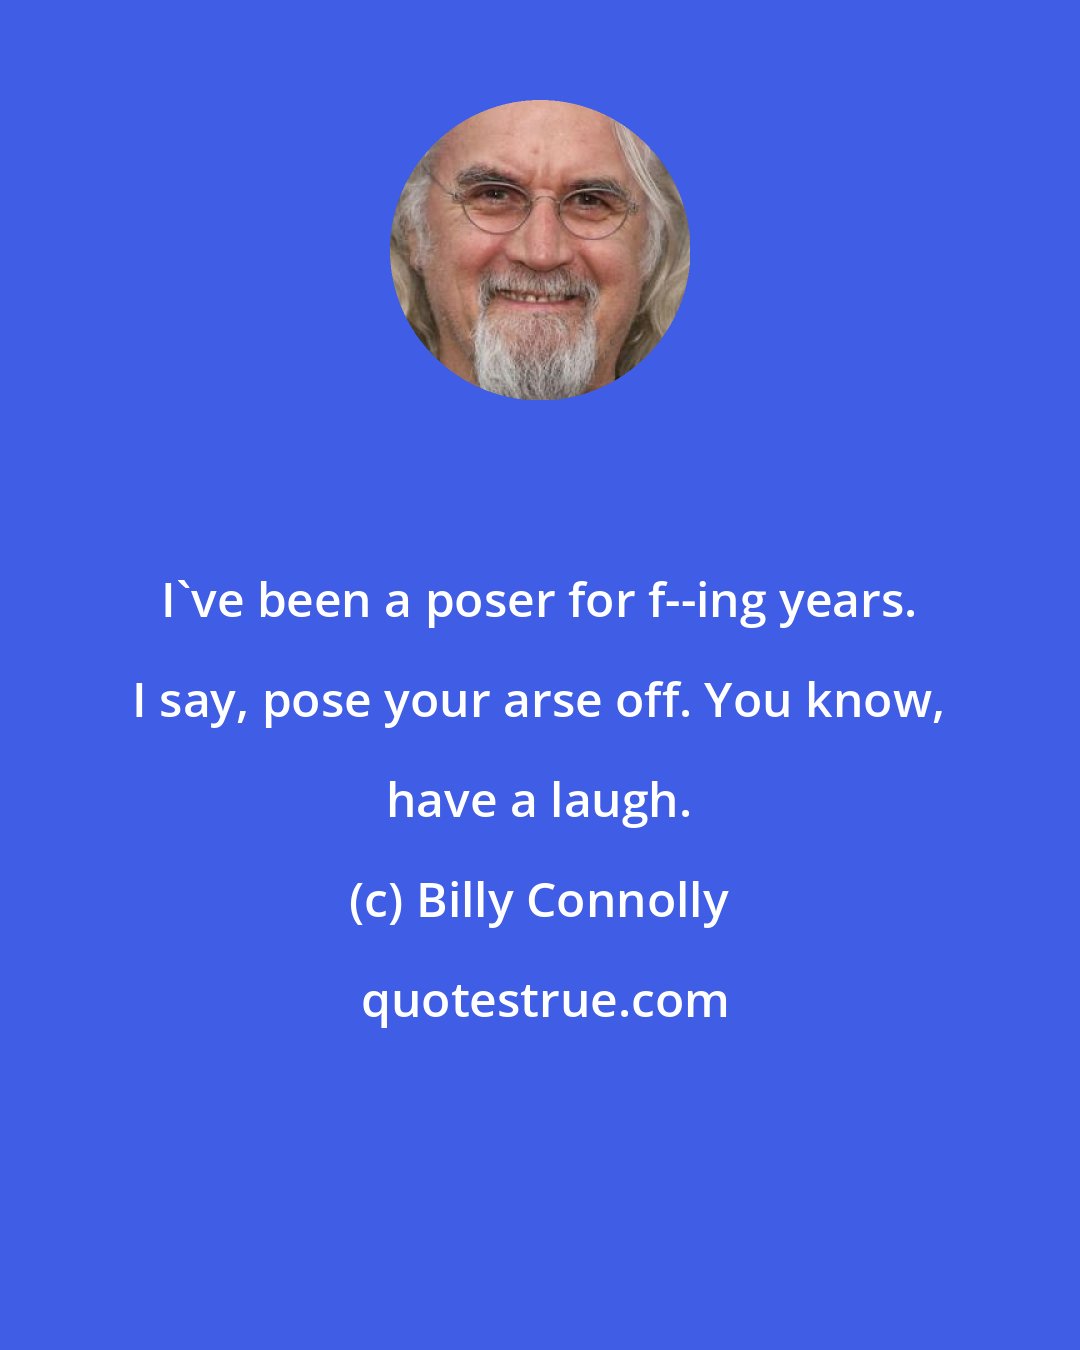 Billy Connolly: I've been a poser for f--ing years. I say, pose your arse off. You know, have a laugh.